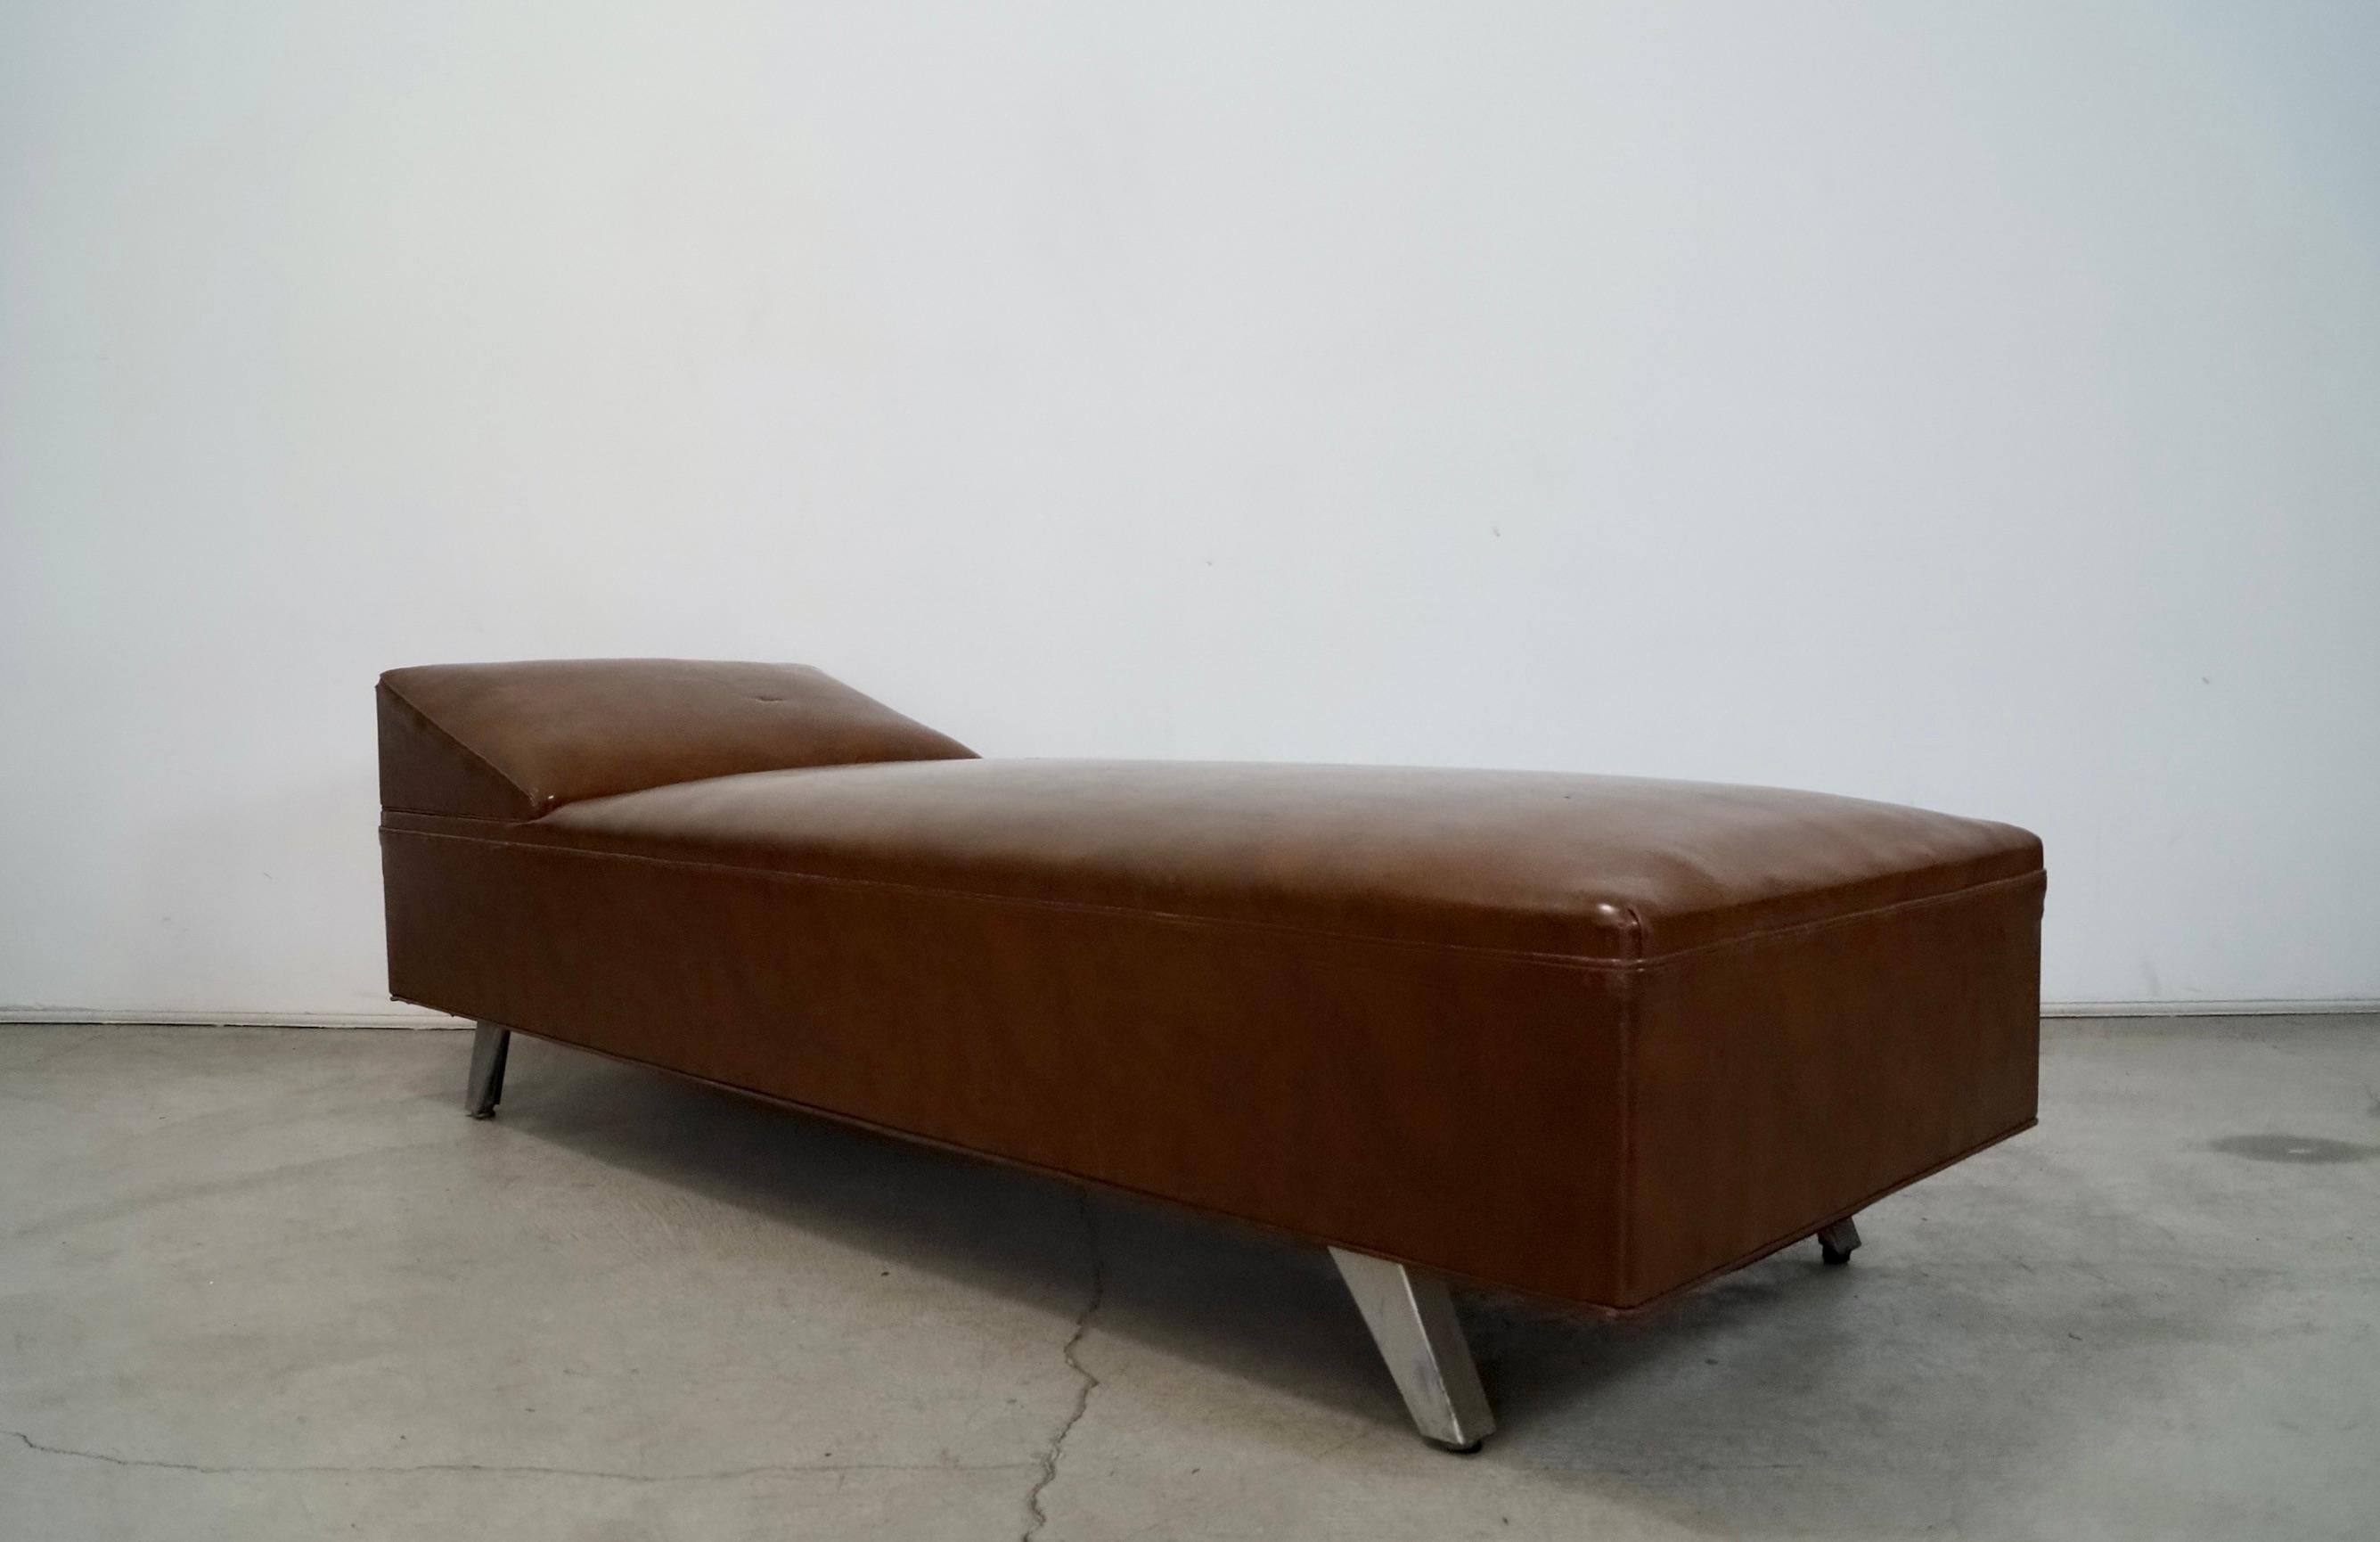 1940's Industrial Era Mid-Century Modern Royal Metal Daybed For Sale 5